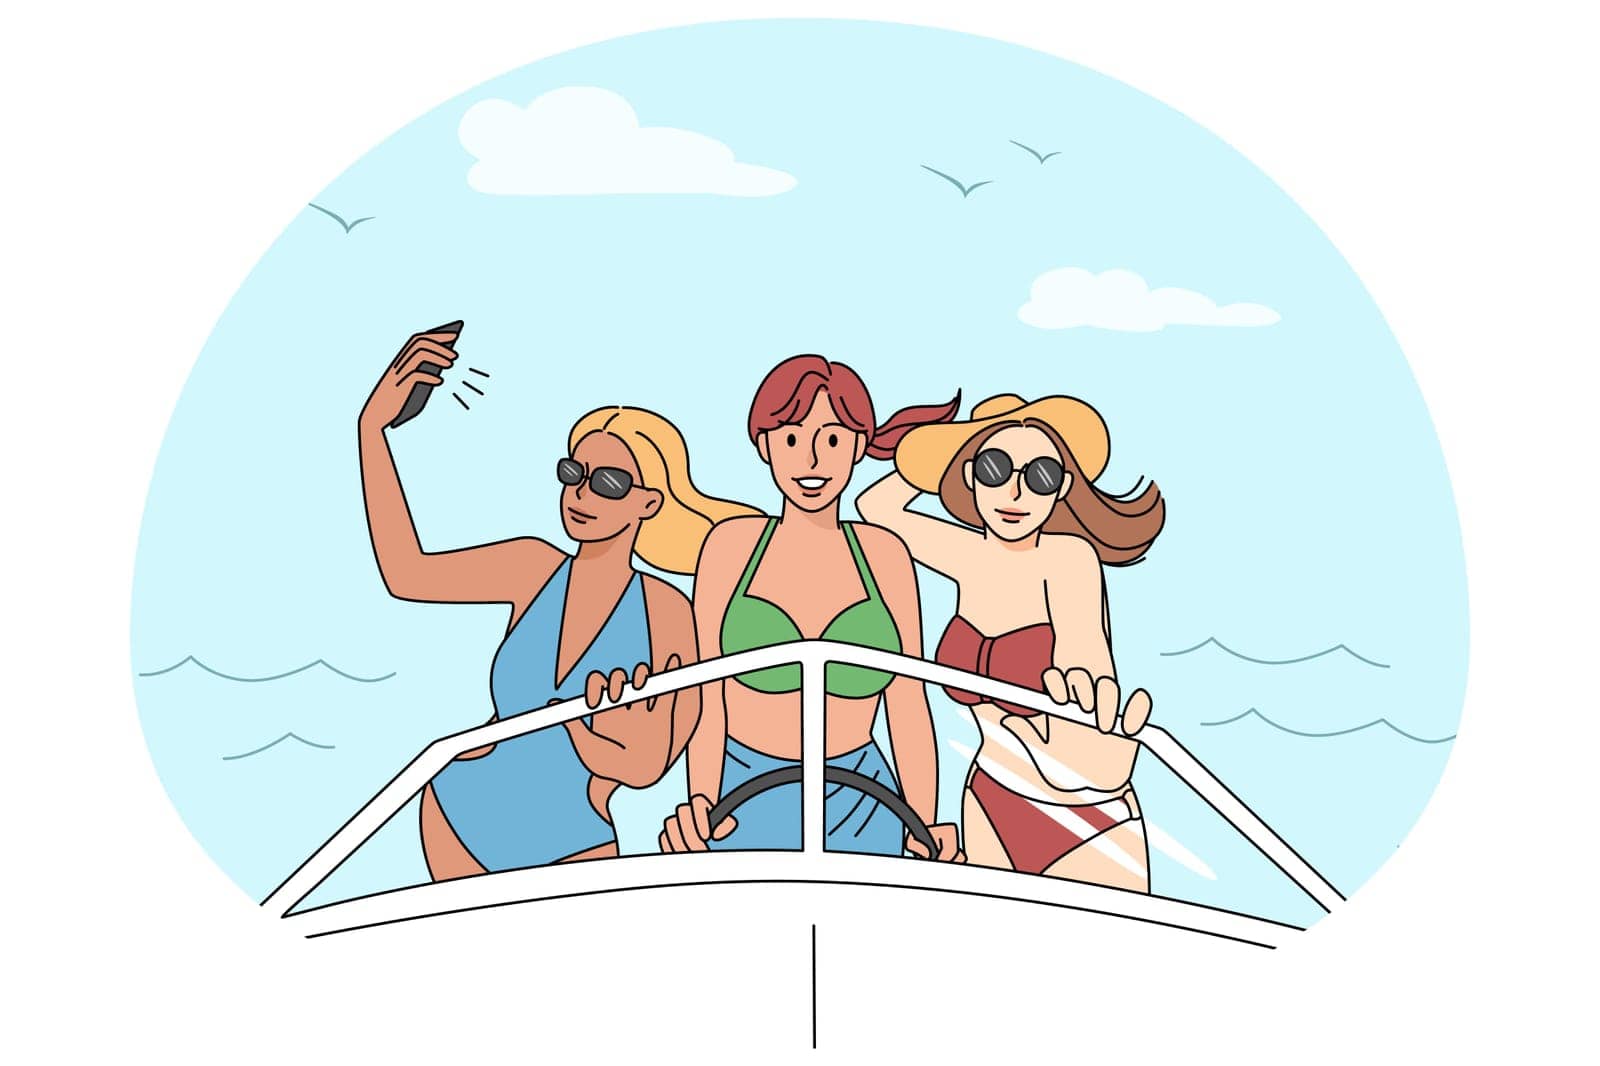 Happy girls in bikini on yacht in sea. Smiling young women having fun on boat in ocean. Summer holiday and relaxation. Vector illustration.